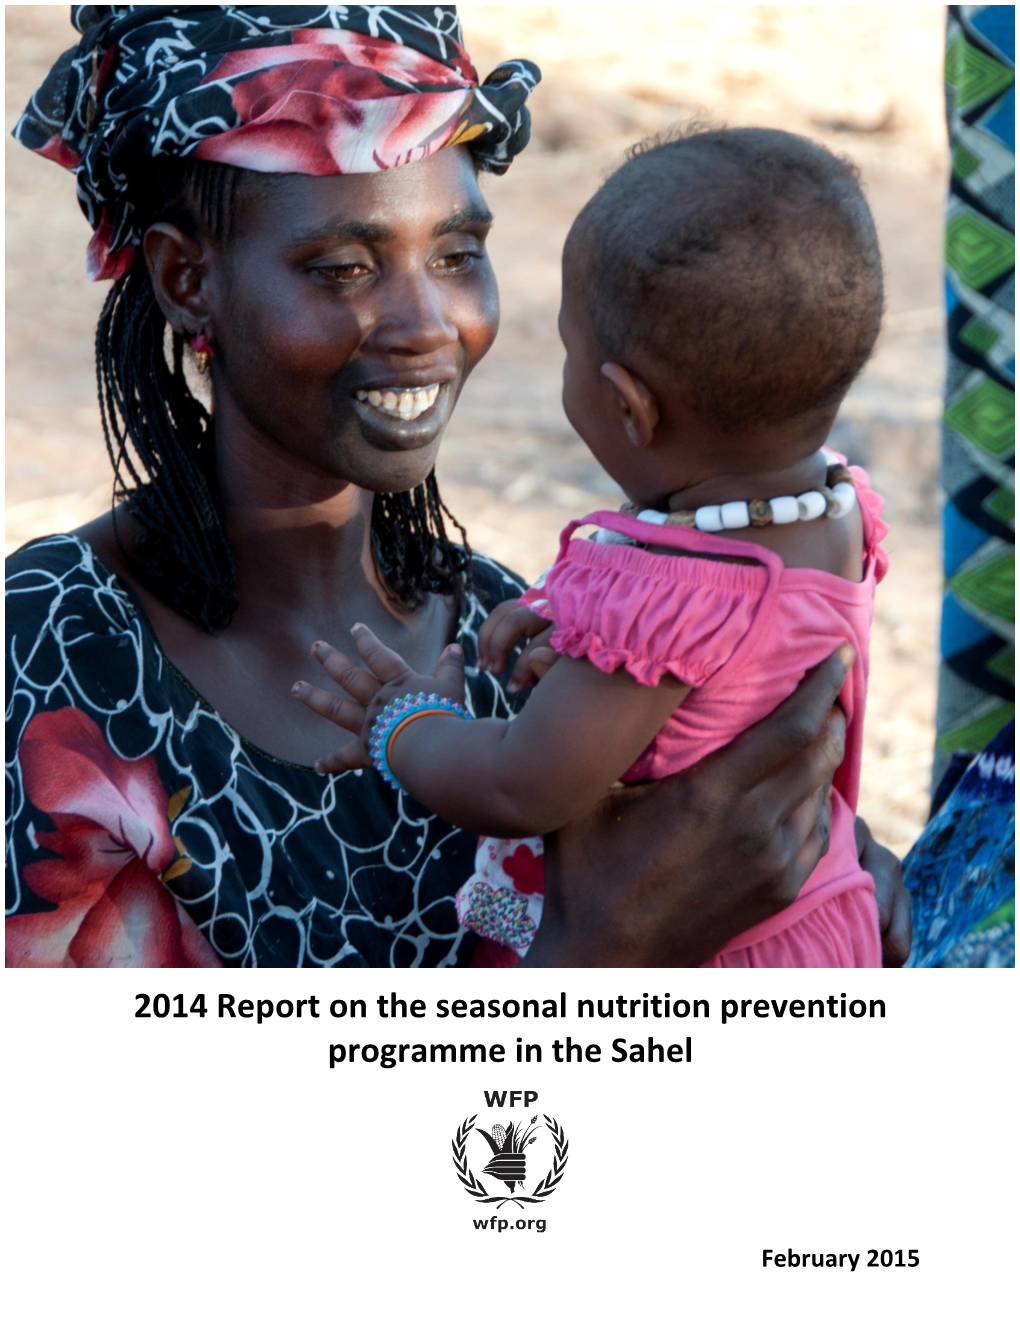 2014 Report on the Seasonal Nutrition Prevention Programme in the Sahel